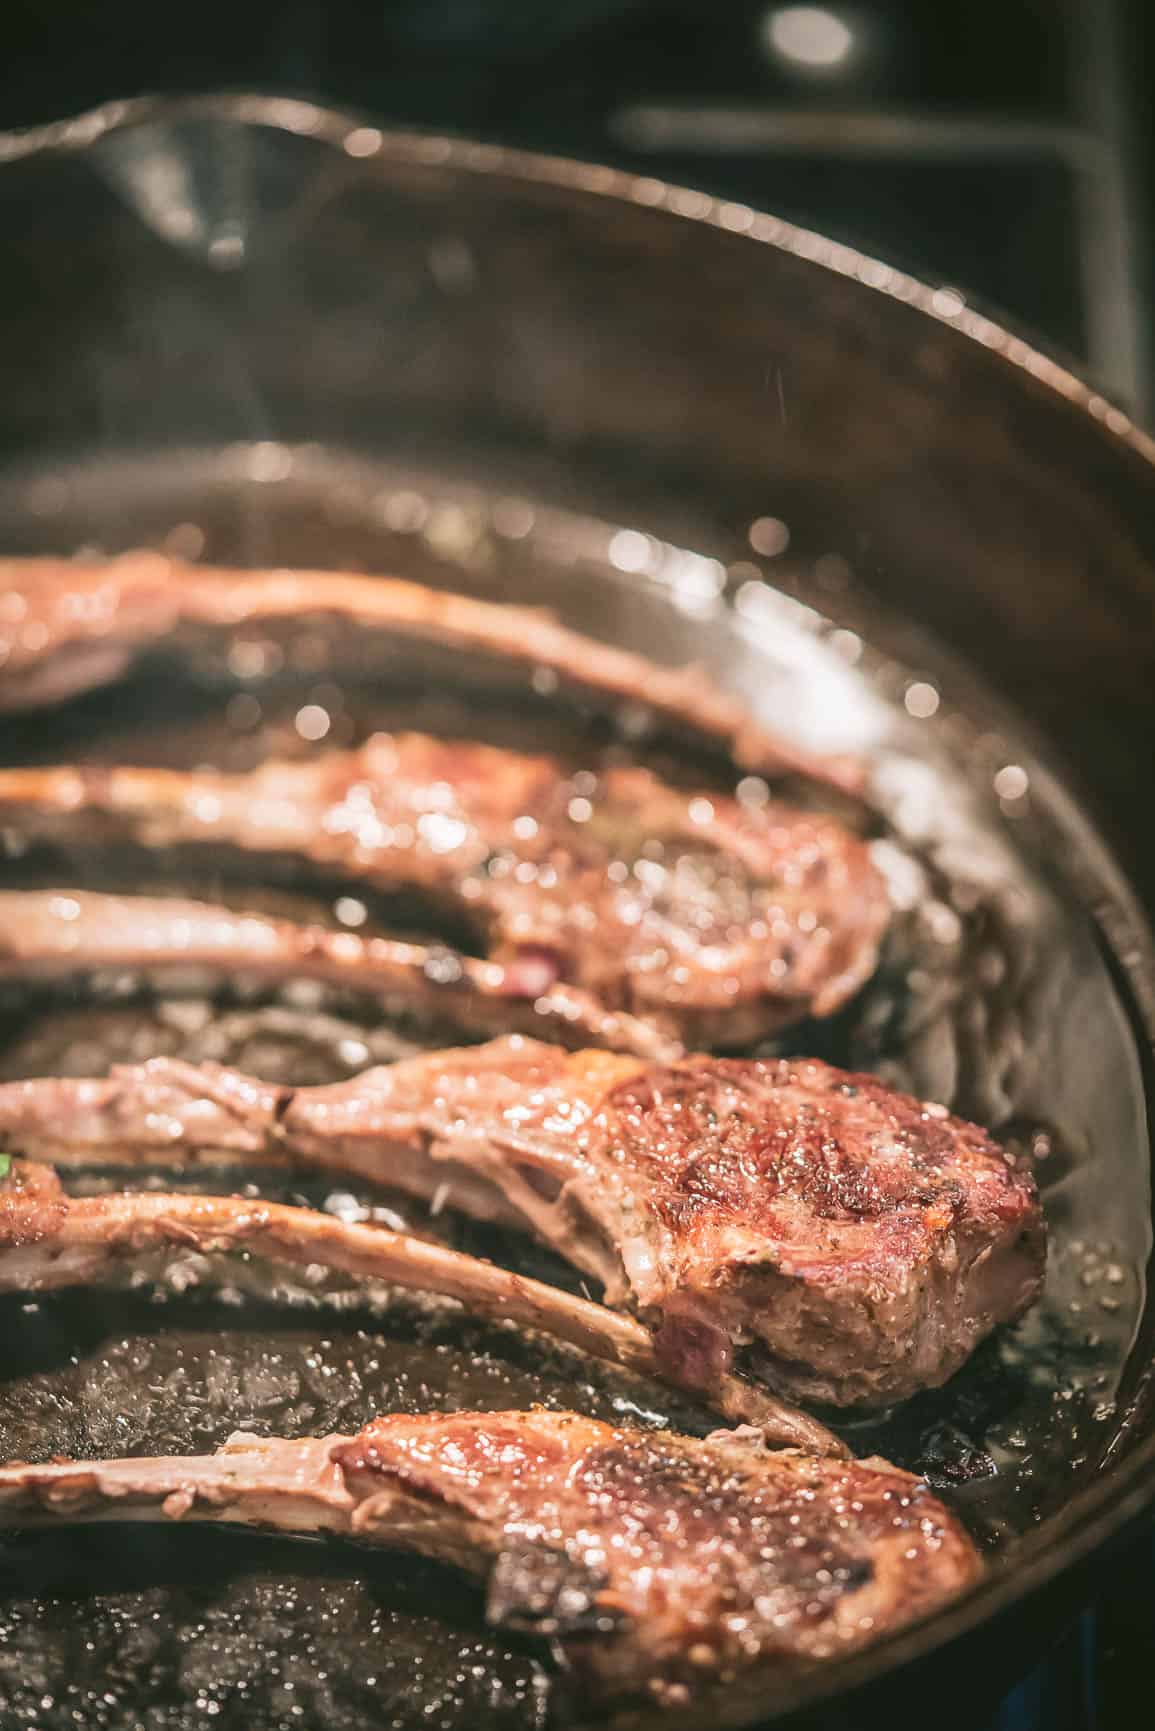 Lamb Chops cooking in a cast iron skillet